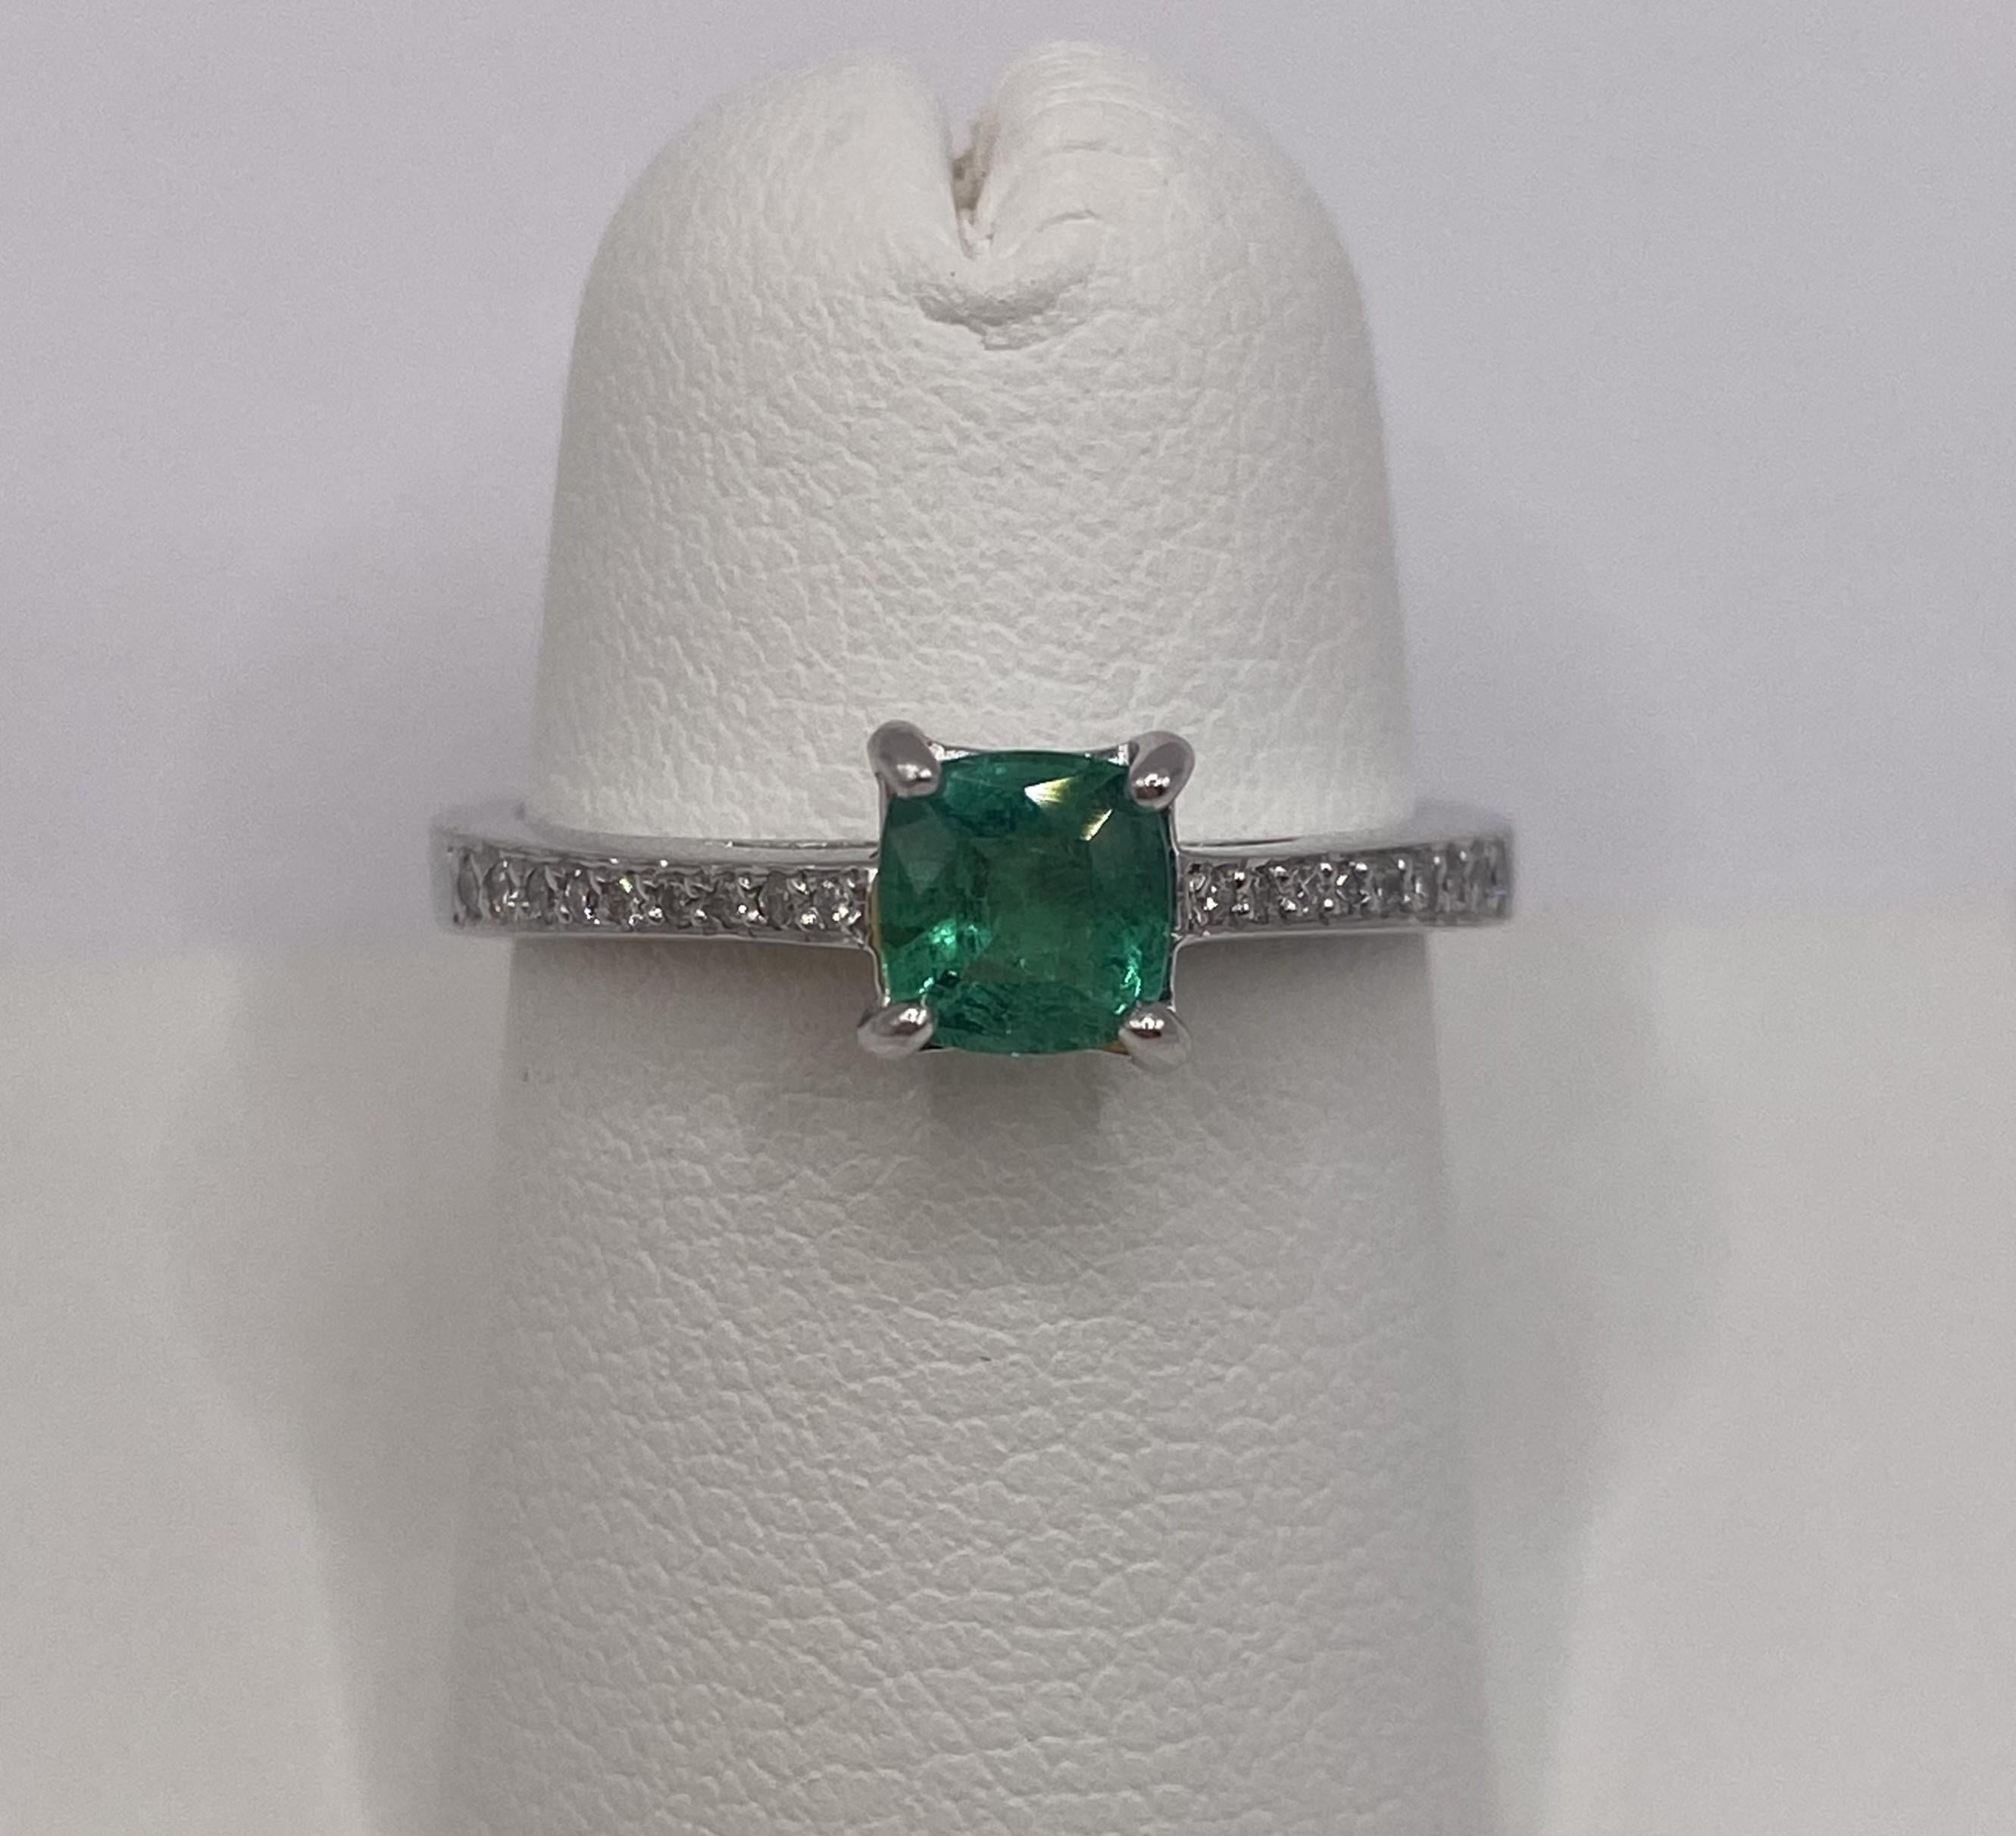 Metal: 14KT White Gold
Finger Size: 6.50
Carat Total Weight: 0.75ctw
(Ring is size 6.5, but is sizable upon request)

Number of Cushion Cut Emeralds: 1
Carat Weight: 0.68ctw
Stone Size: 5.0 x 4.85mm

Number of Round Diamonds: 18
Carat Weight: 0.07ctw